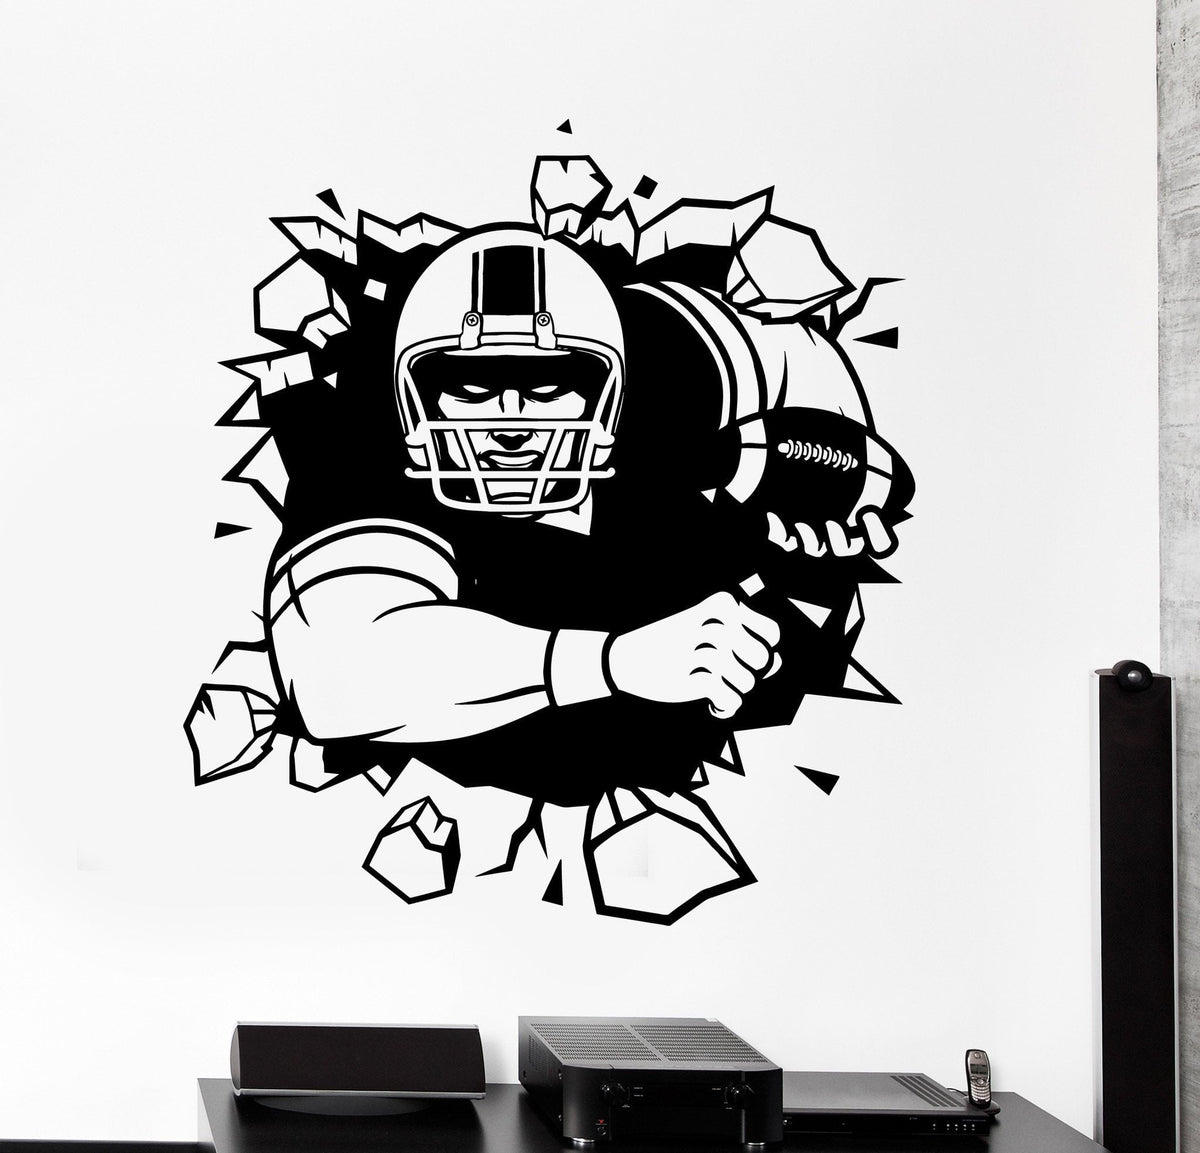 Wall Vinyl Decal Football Player Breaking The Wall Super Bowl Home Int ...